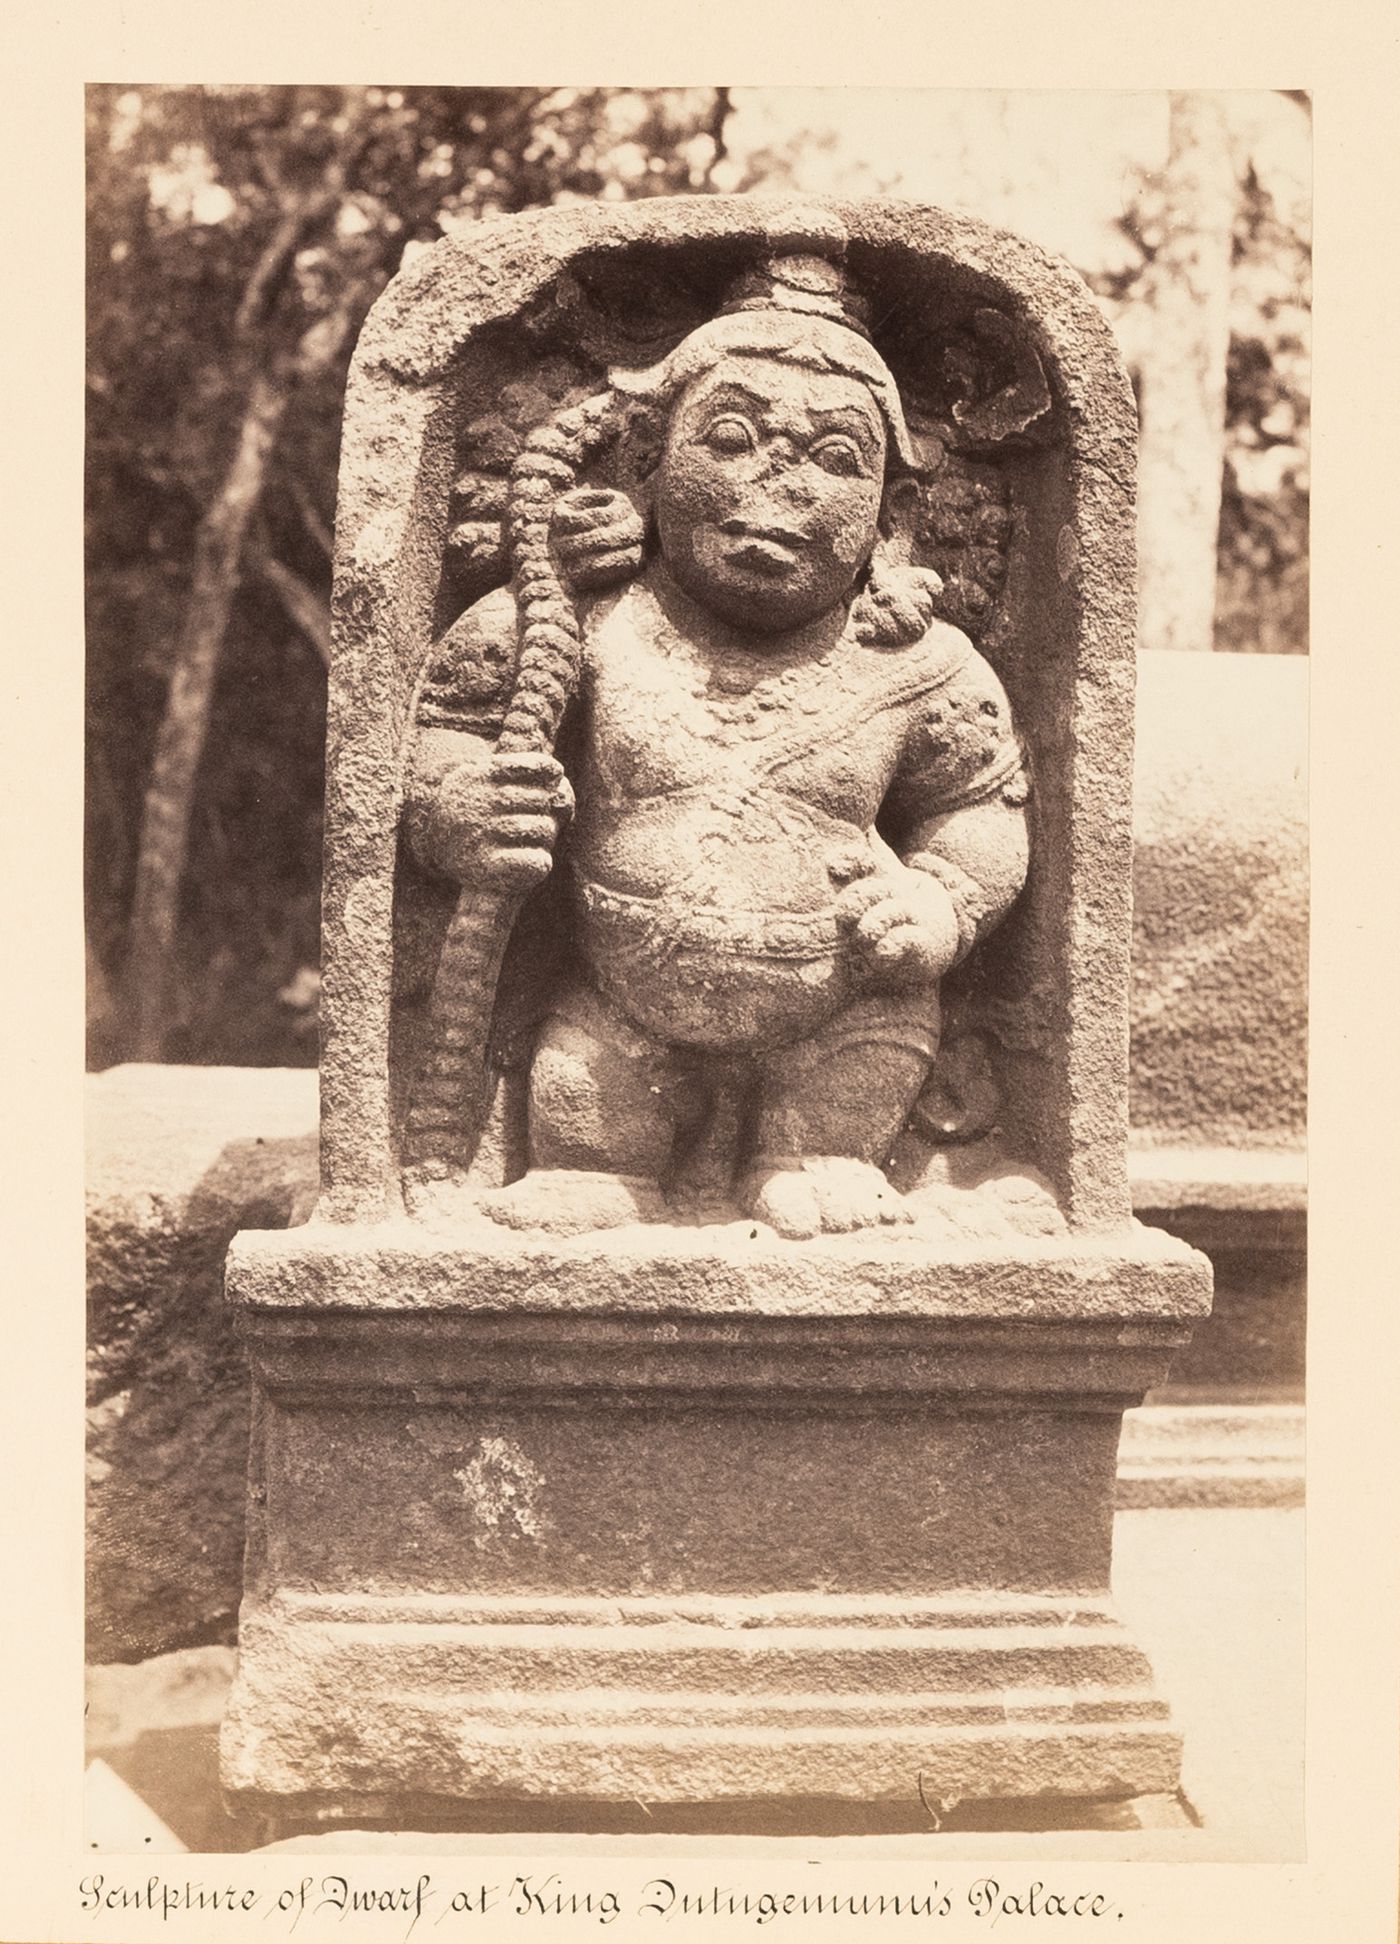 Close-up view of a stele showing a relief of a dwarf, King Mahasen's Palace, Anuradhapura, Ceylon (now Sri Lanka)